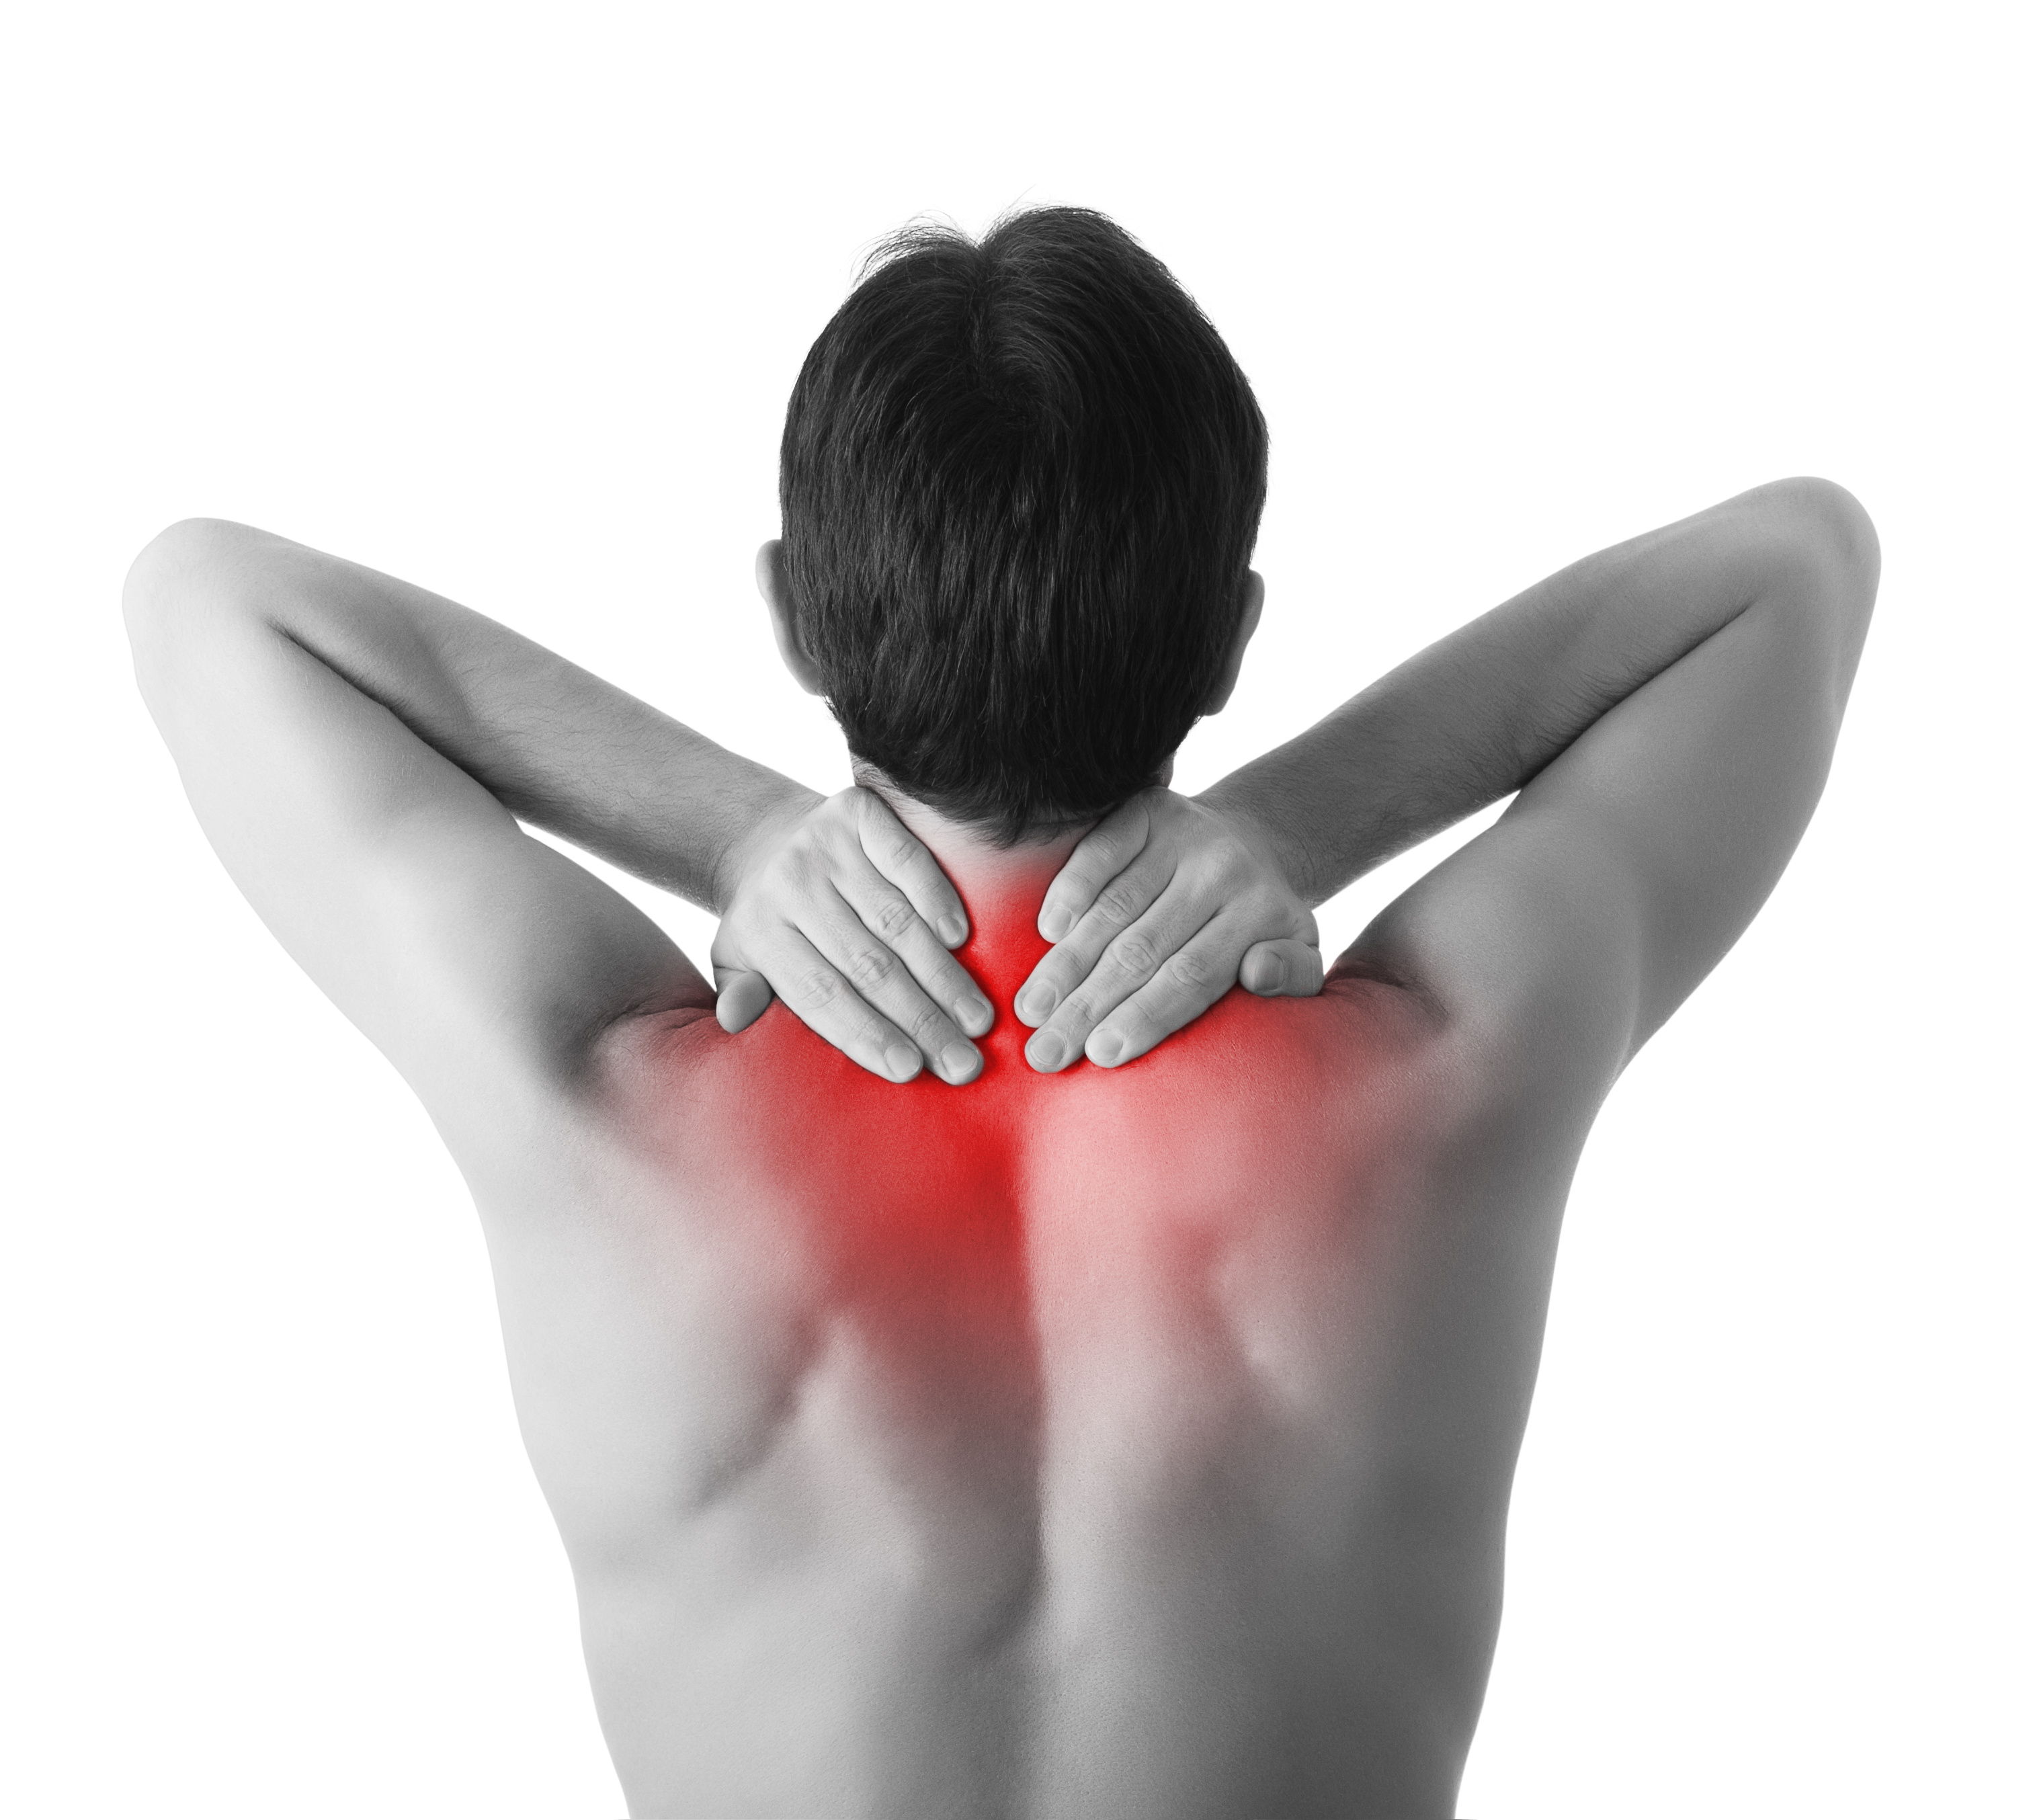 neck pain - What Causes Neck Pain And How Can You Fix It